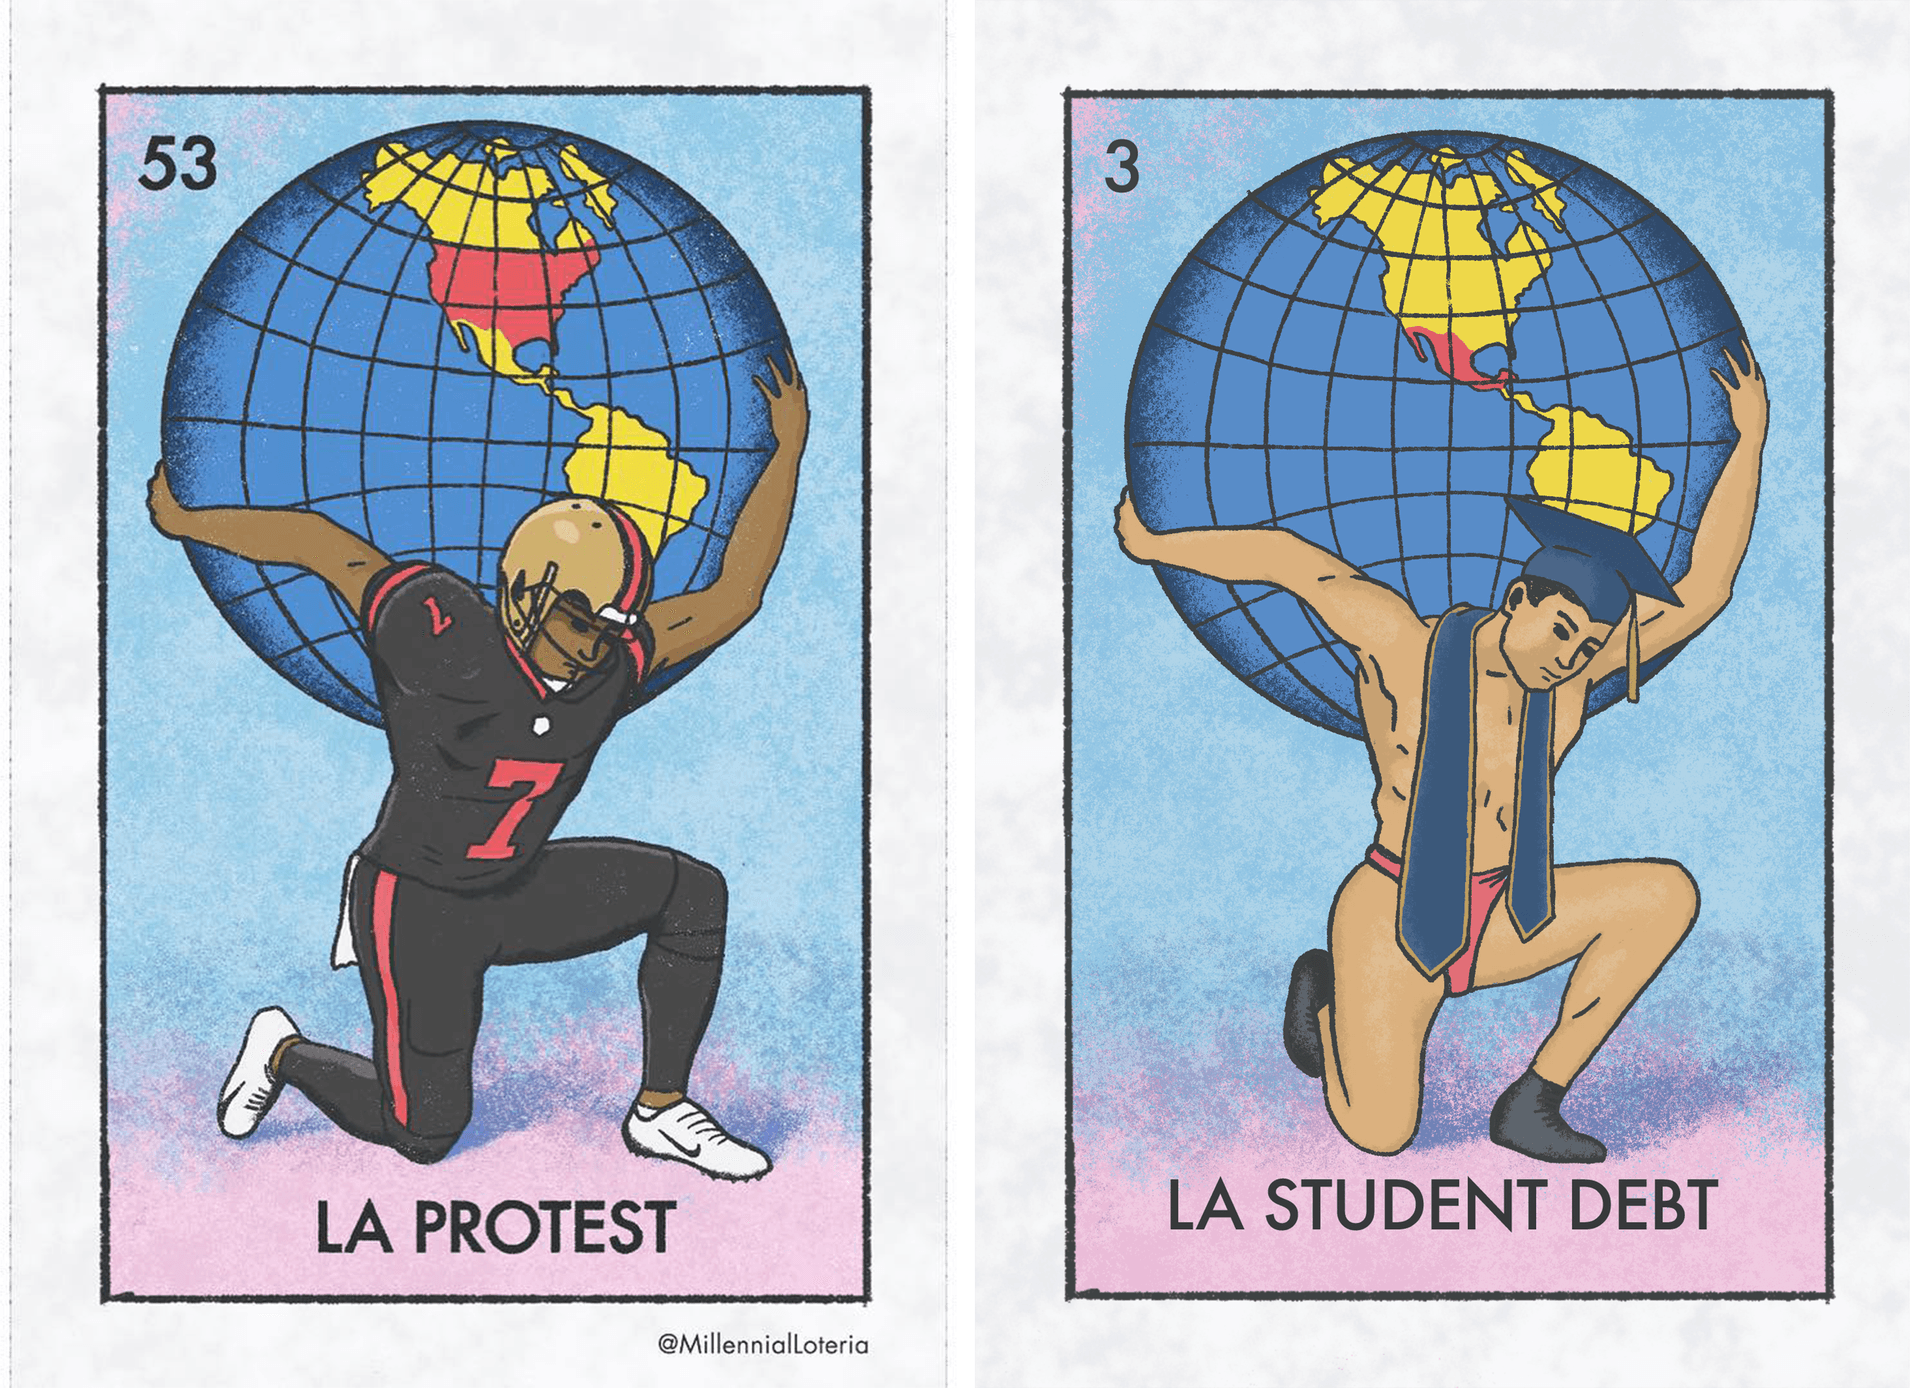 Illustrated cards depicting a football player holding a globe with the text 